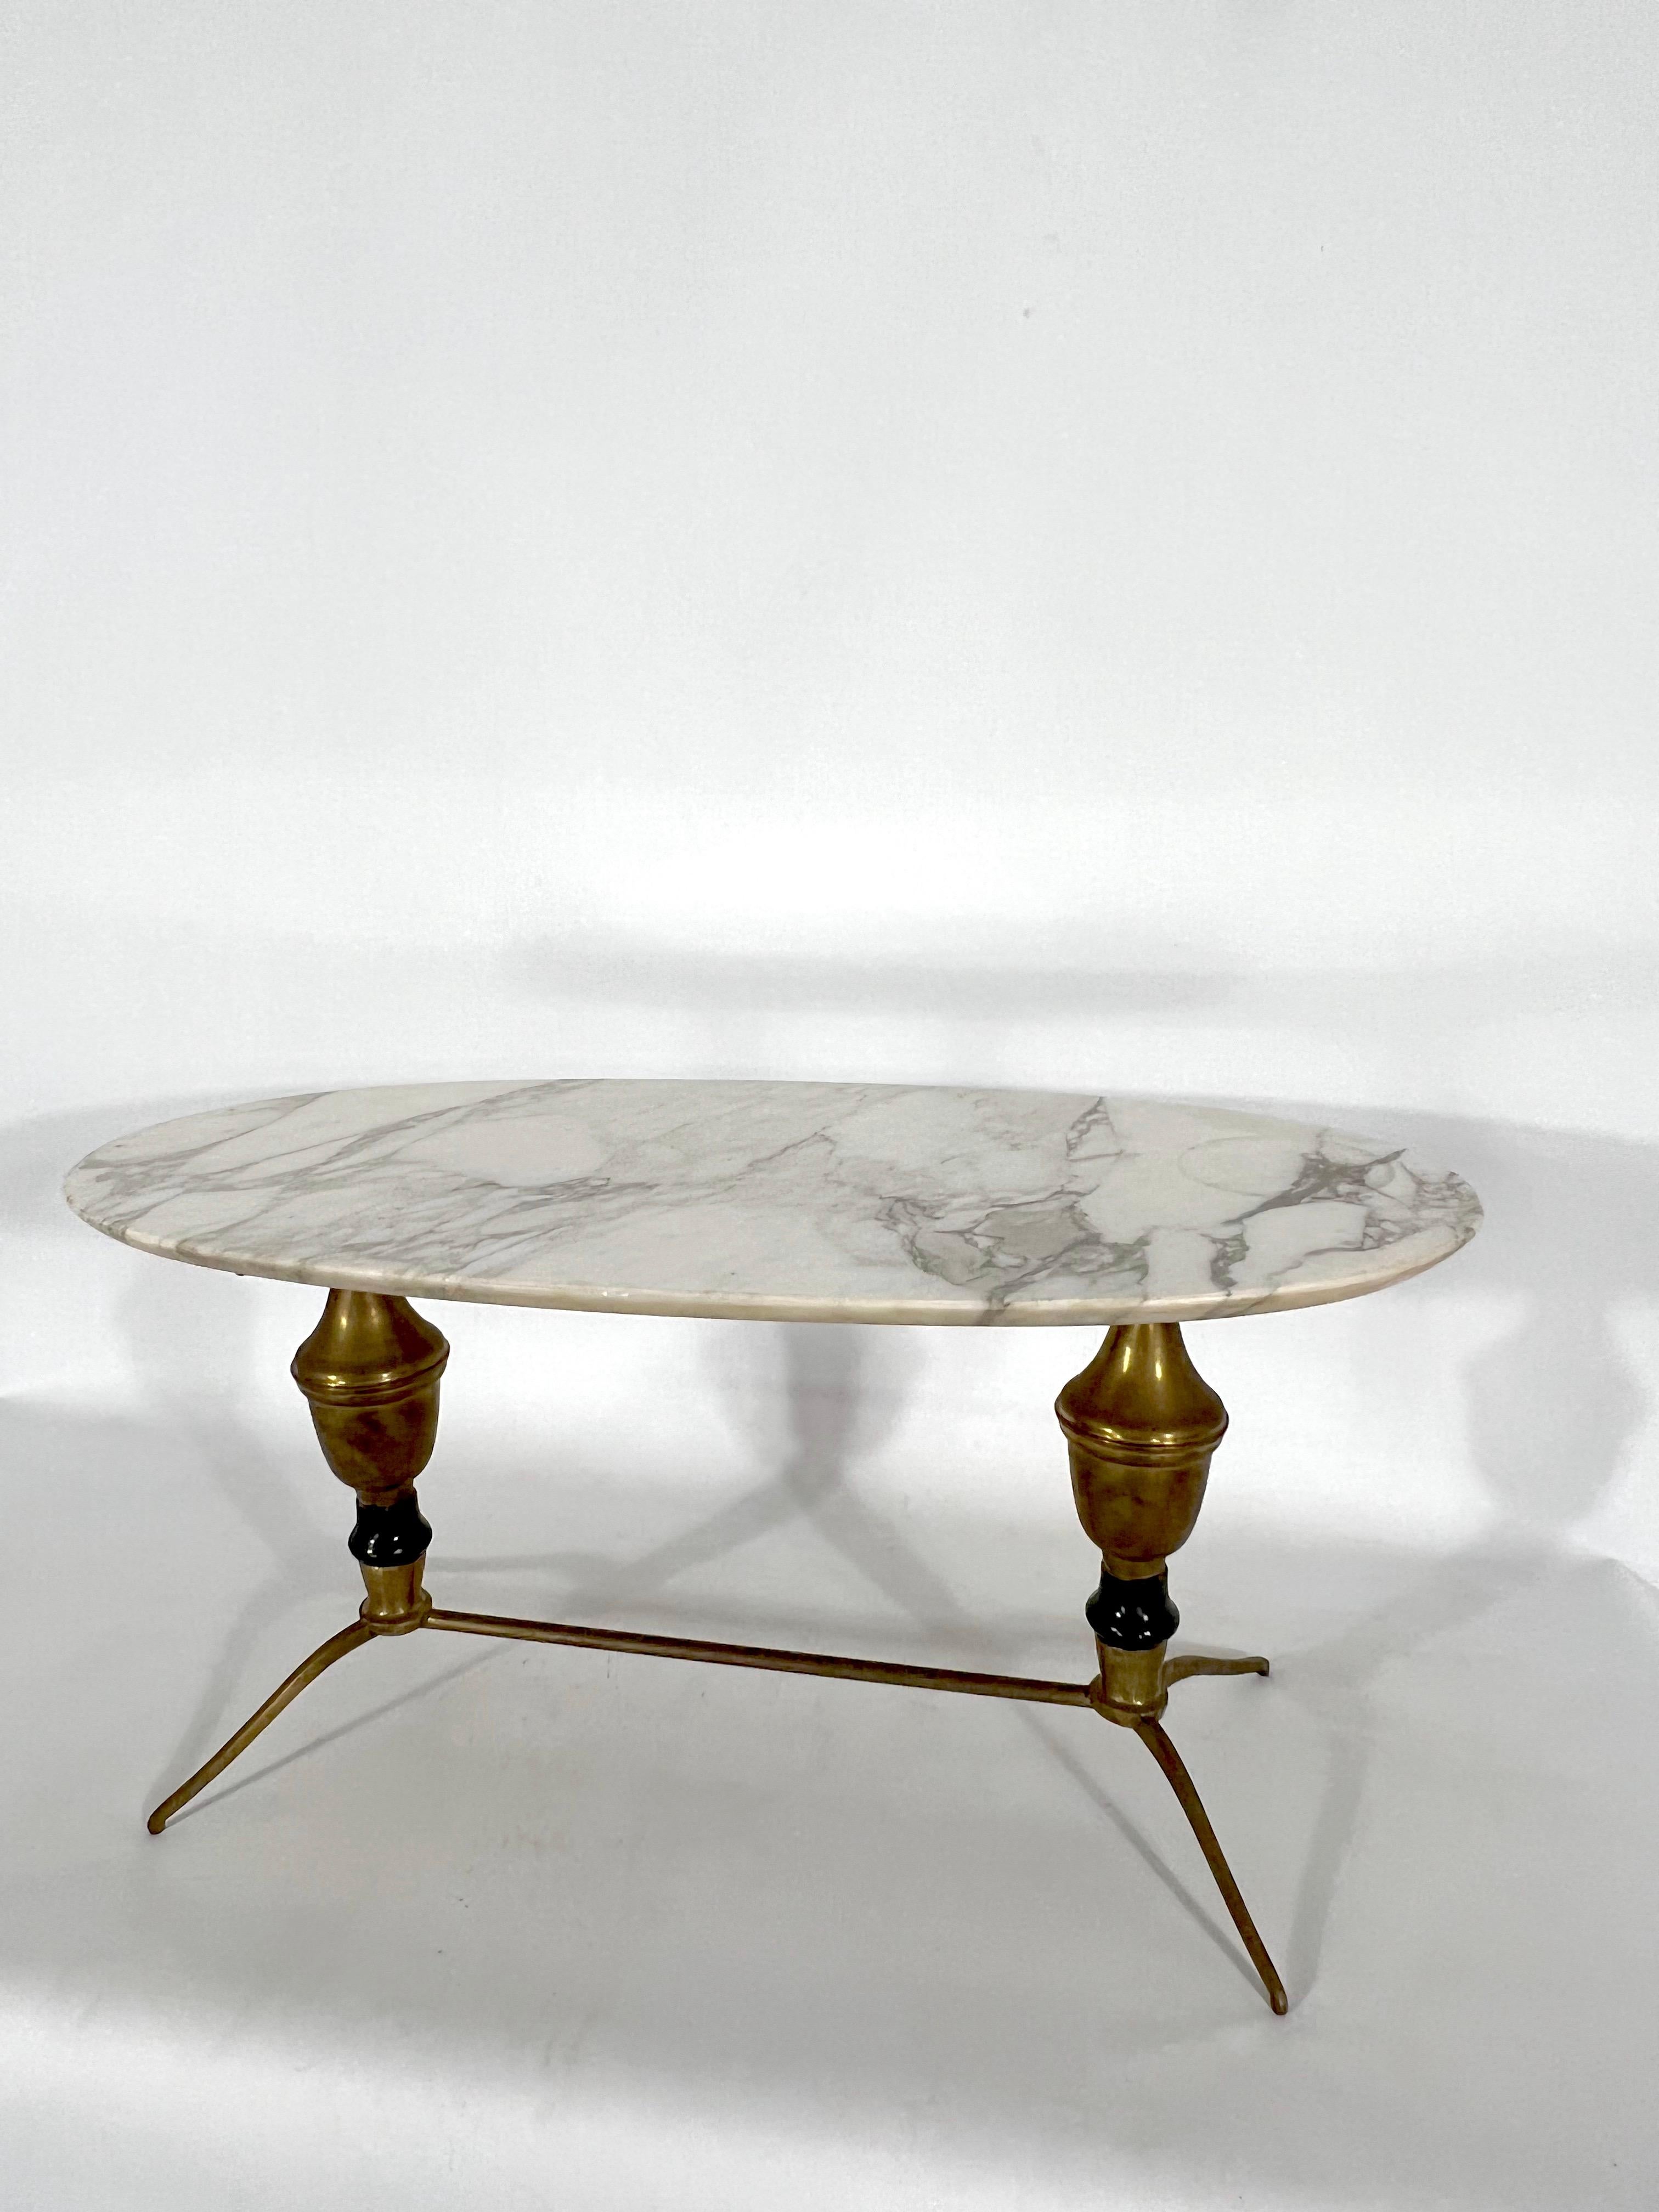 Vintage Brass and Marble Coffee Table, Italy 1950s For Sale 2